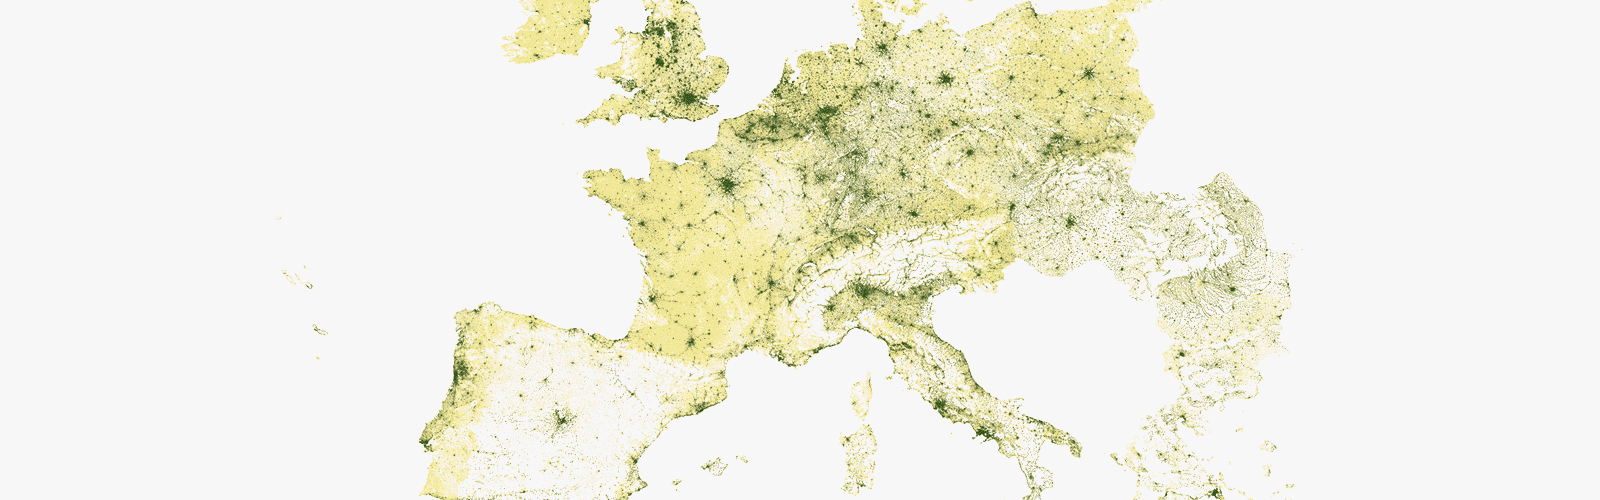 Population distribution in Europe